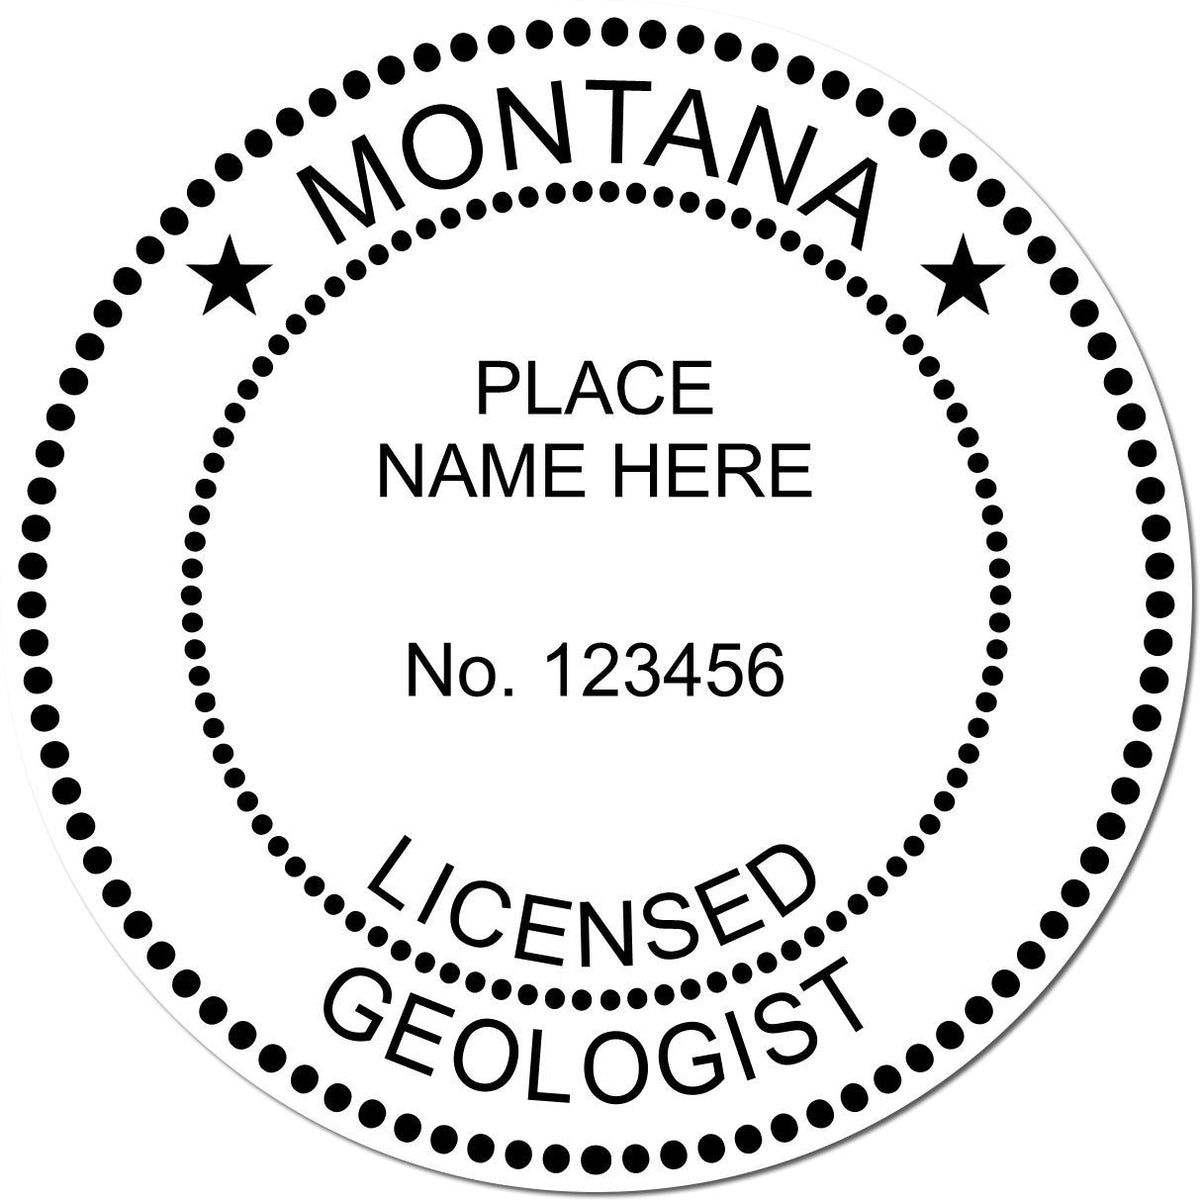 An alternative view of the Premium MaxLight Pre-Inked Montana Geology Stamp stamped on a sheet of paper showing the image in use